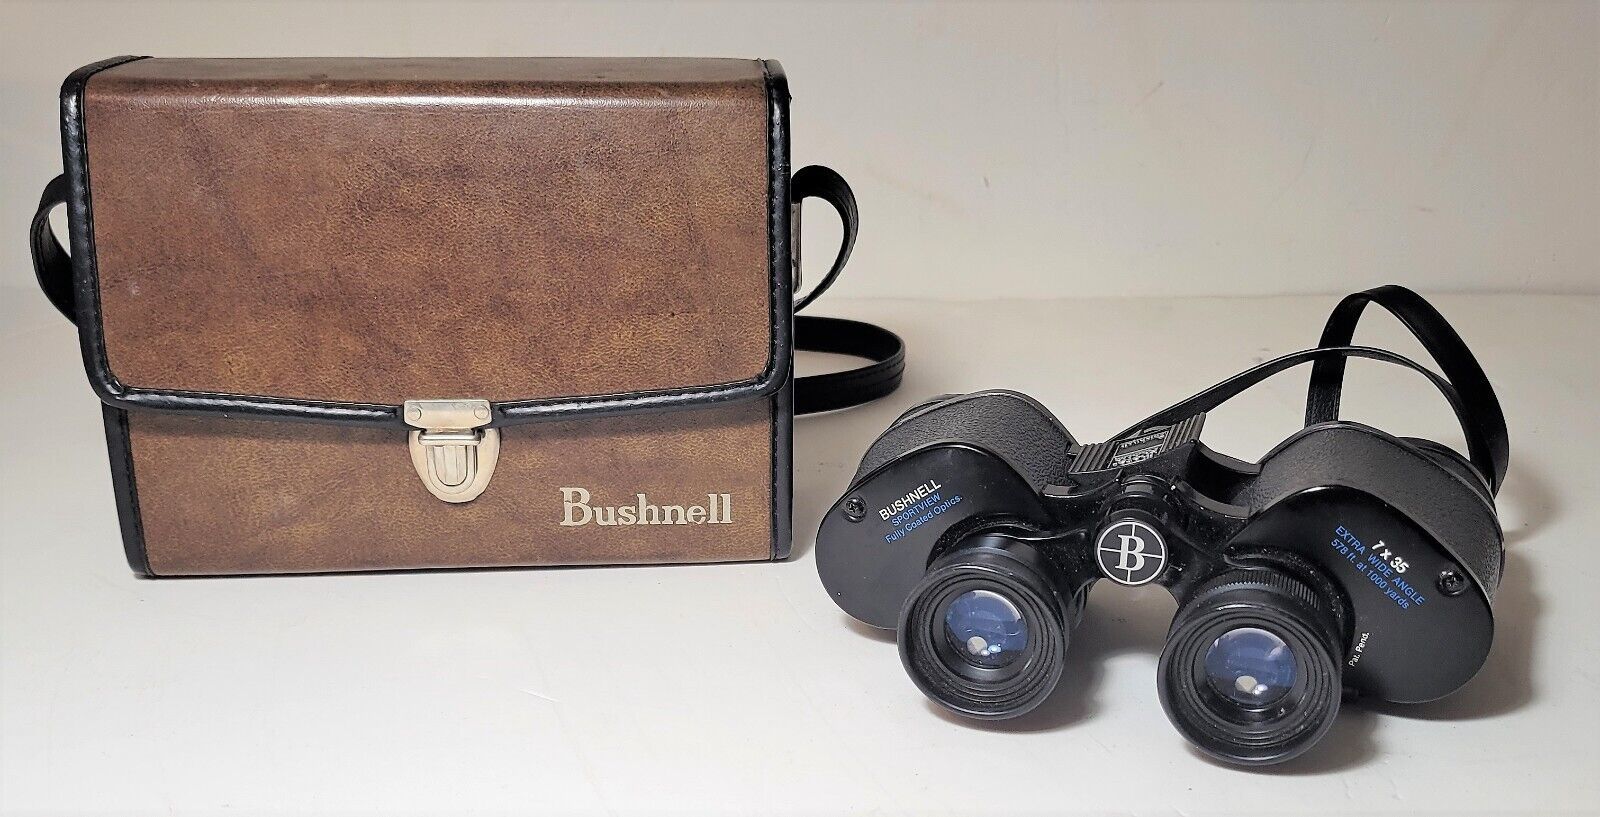 Bushnell Sport view 7x35 Extra Wide Angle Binoculars -Japan- Fully Coated Optics - $35.53